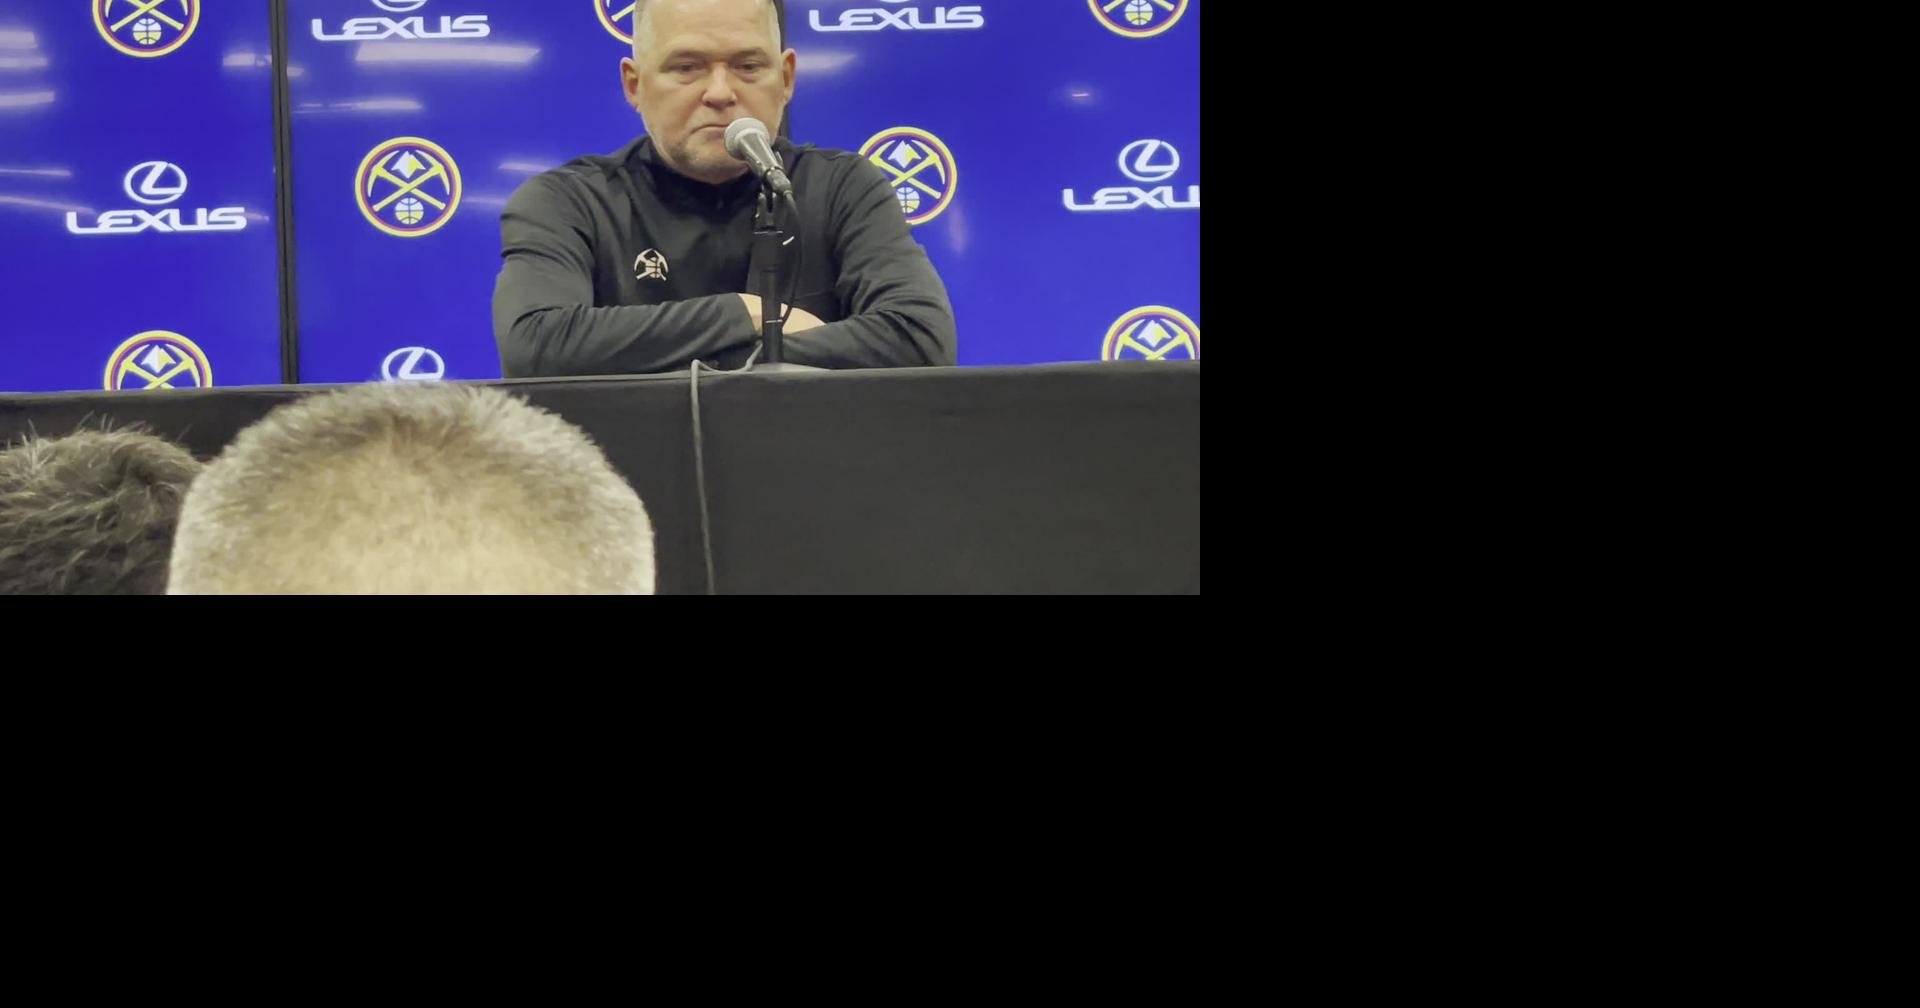 Grateful Dead - Congrats to Michael Malone and the Denver Nuggets